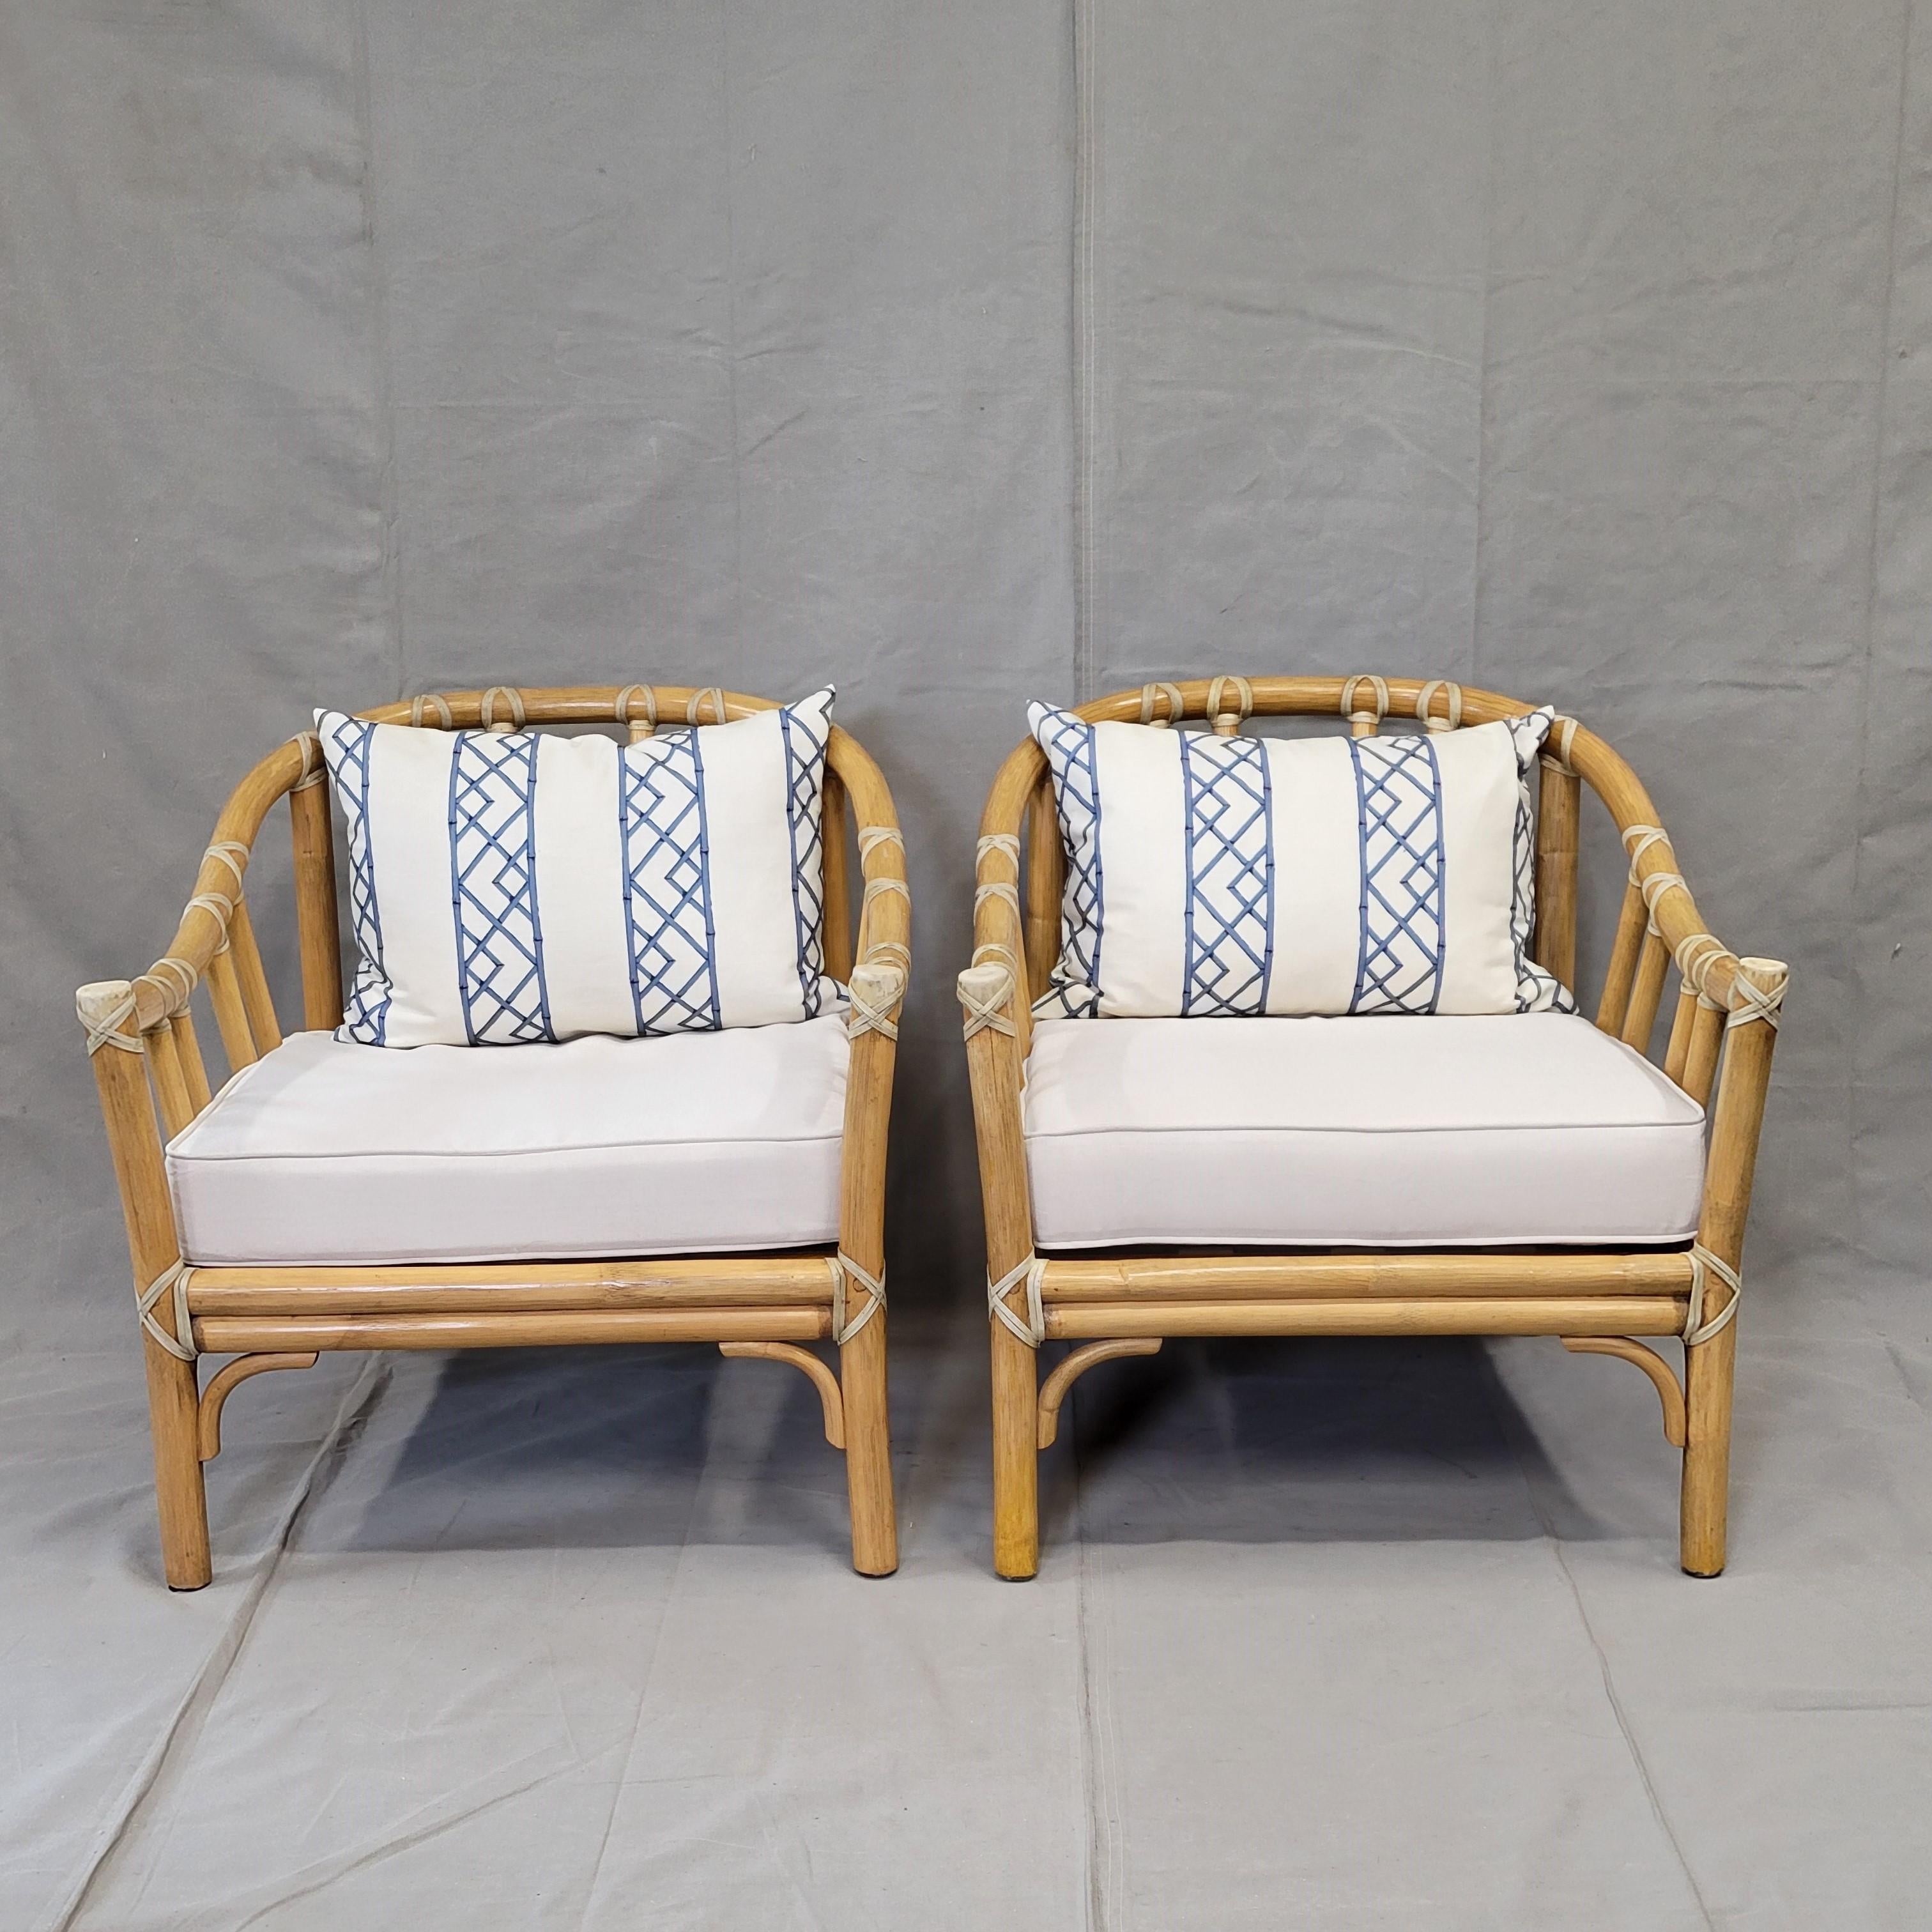 A simply stunning pair of classic mid-century modern 1978 McGuire bamboo lounge chairs with McGuire trademark rawhide binding. Arms and feet show signs of wear and use, see photos, but overall in great condition considering they are 45+ years old!